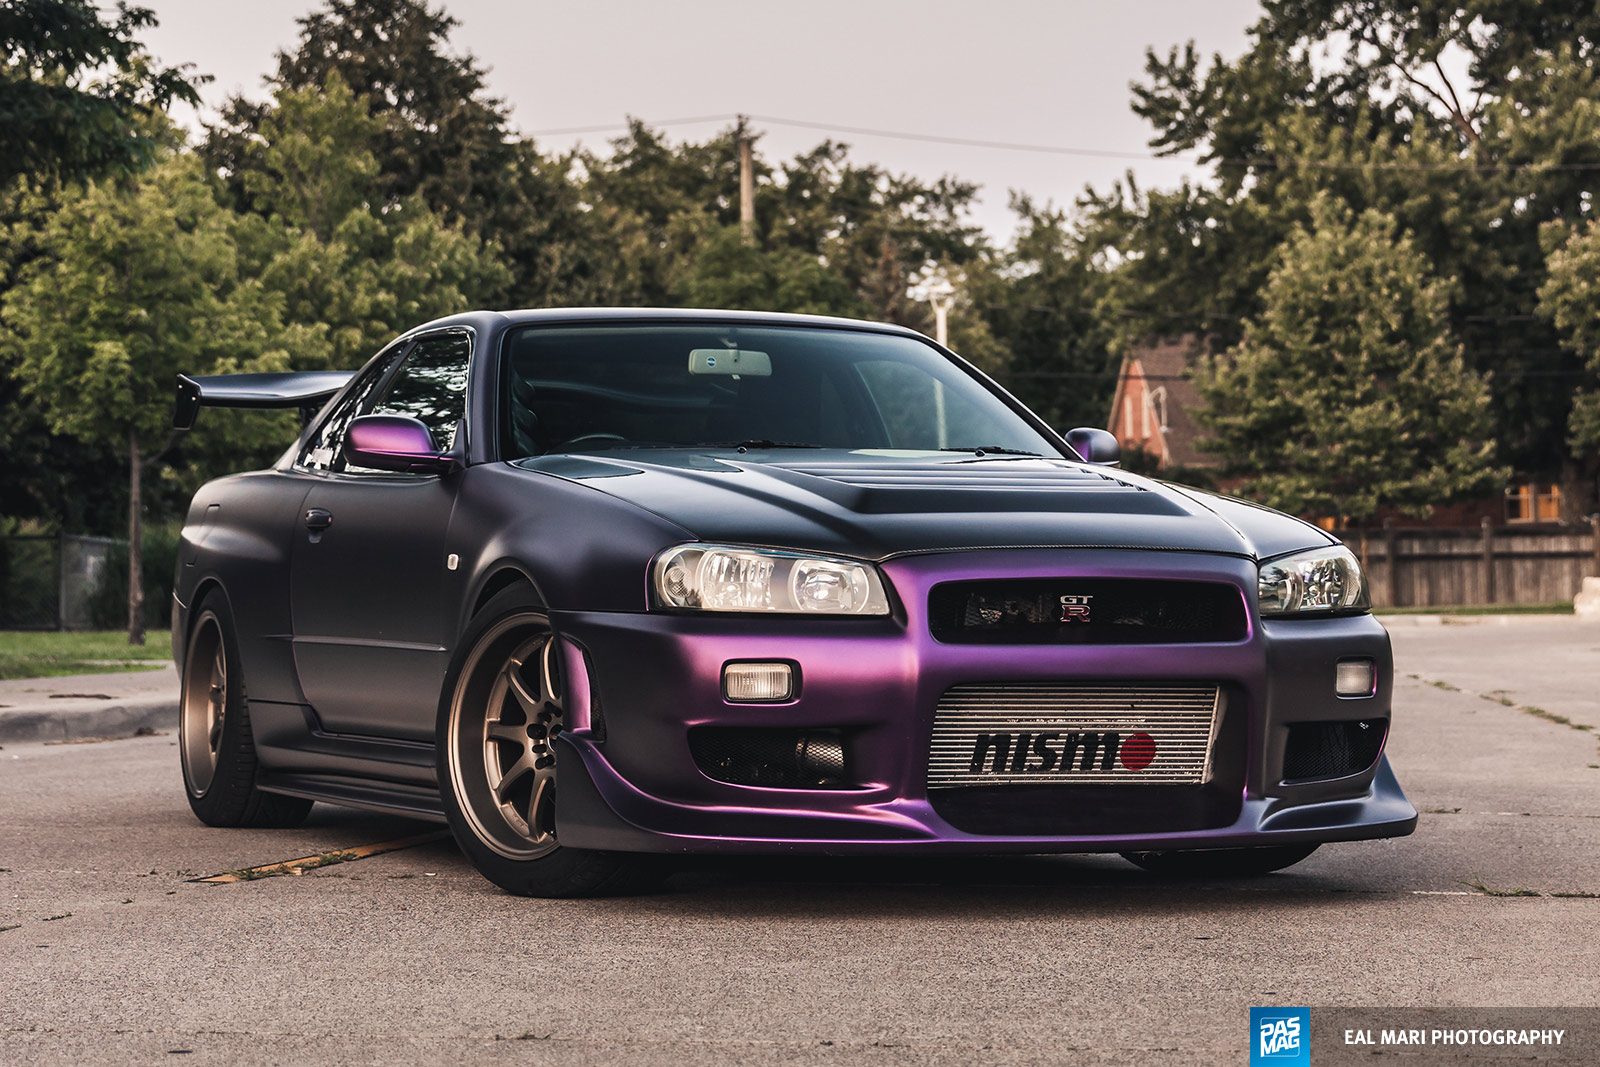 The Mechanic Mike Recine S 1999 Nissan Skyline Gt R Pasmag Is The Tuner S Source For Modified Car Culture Since 1999